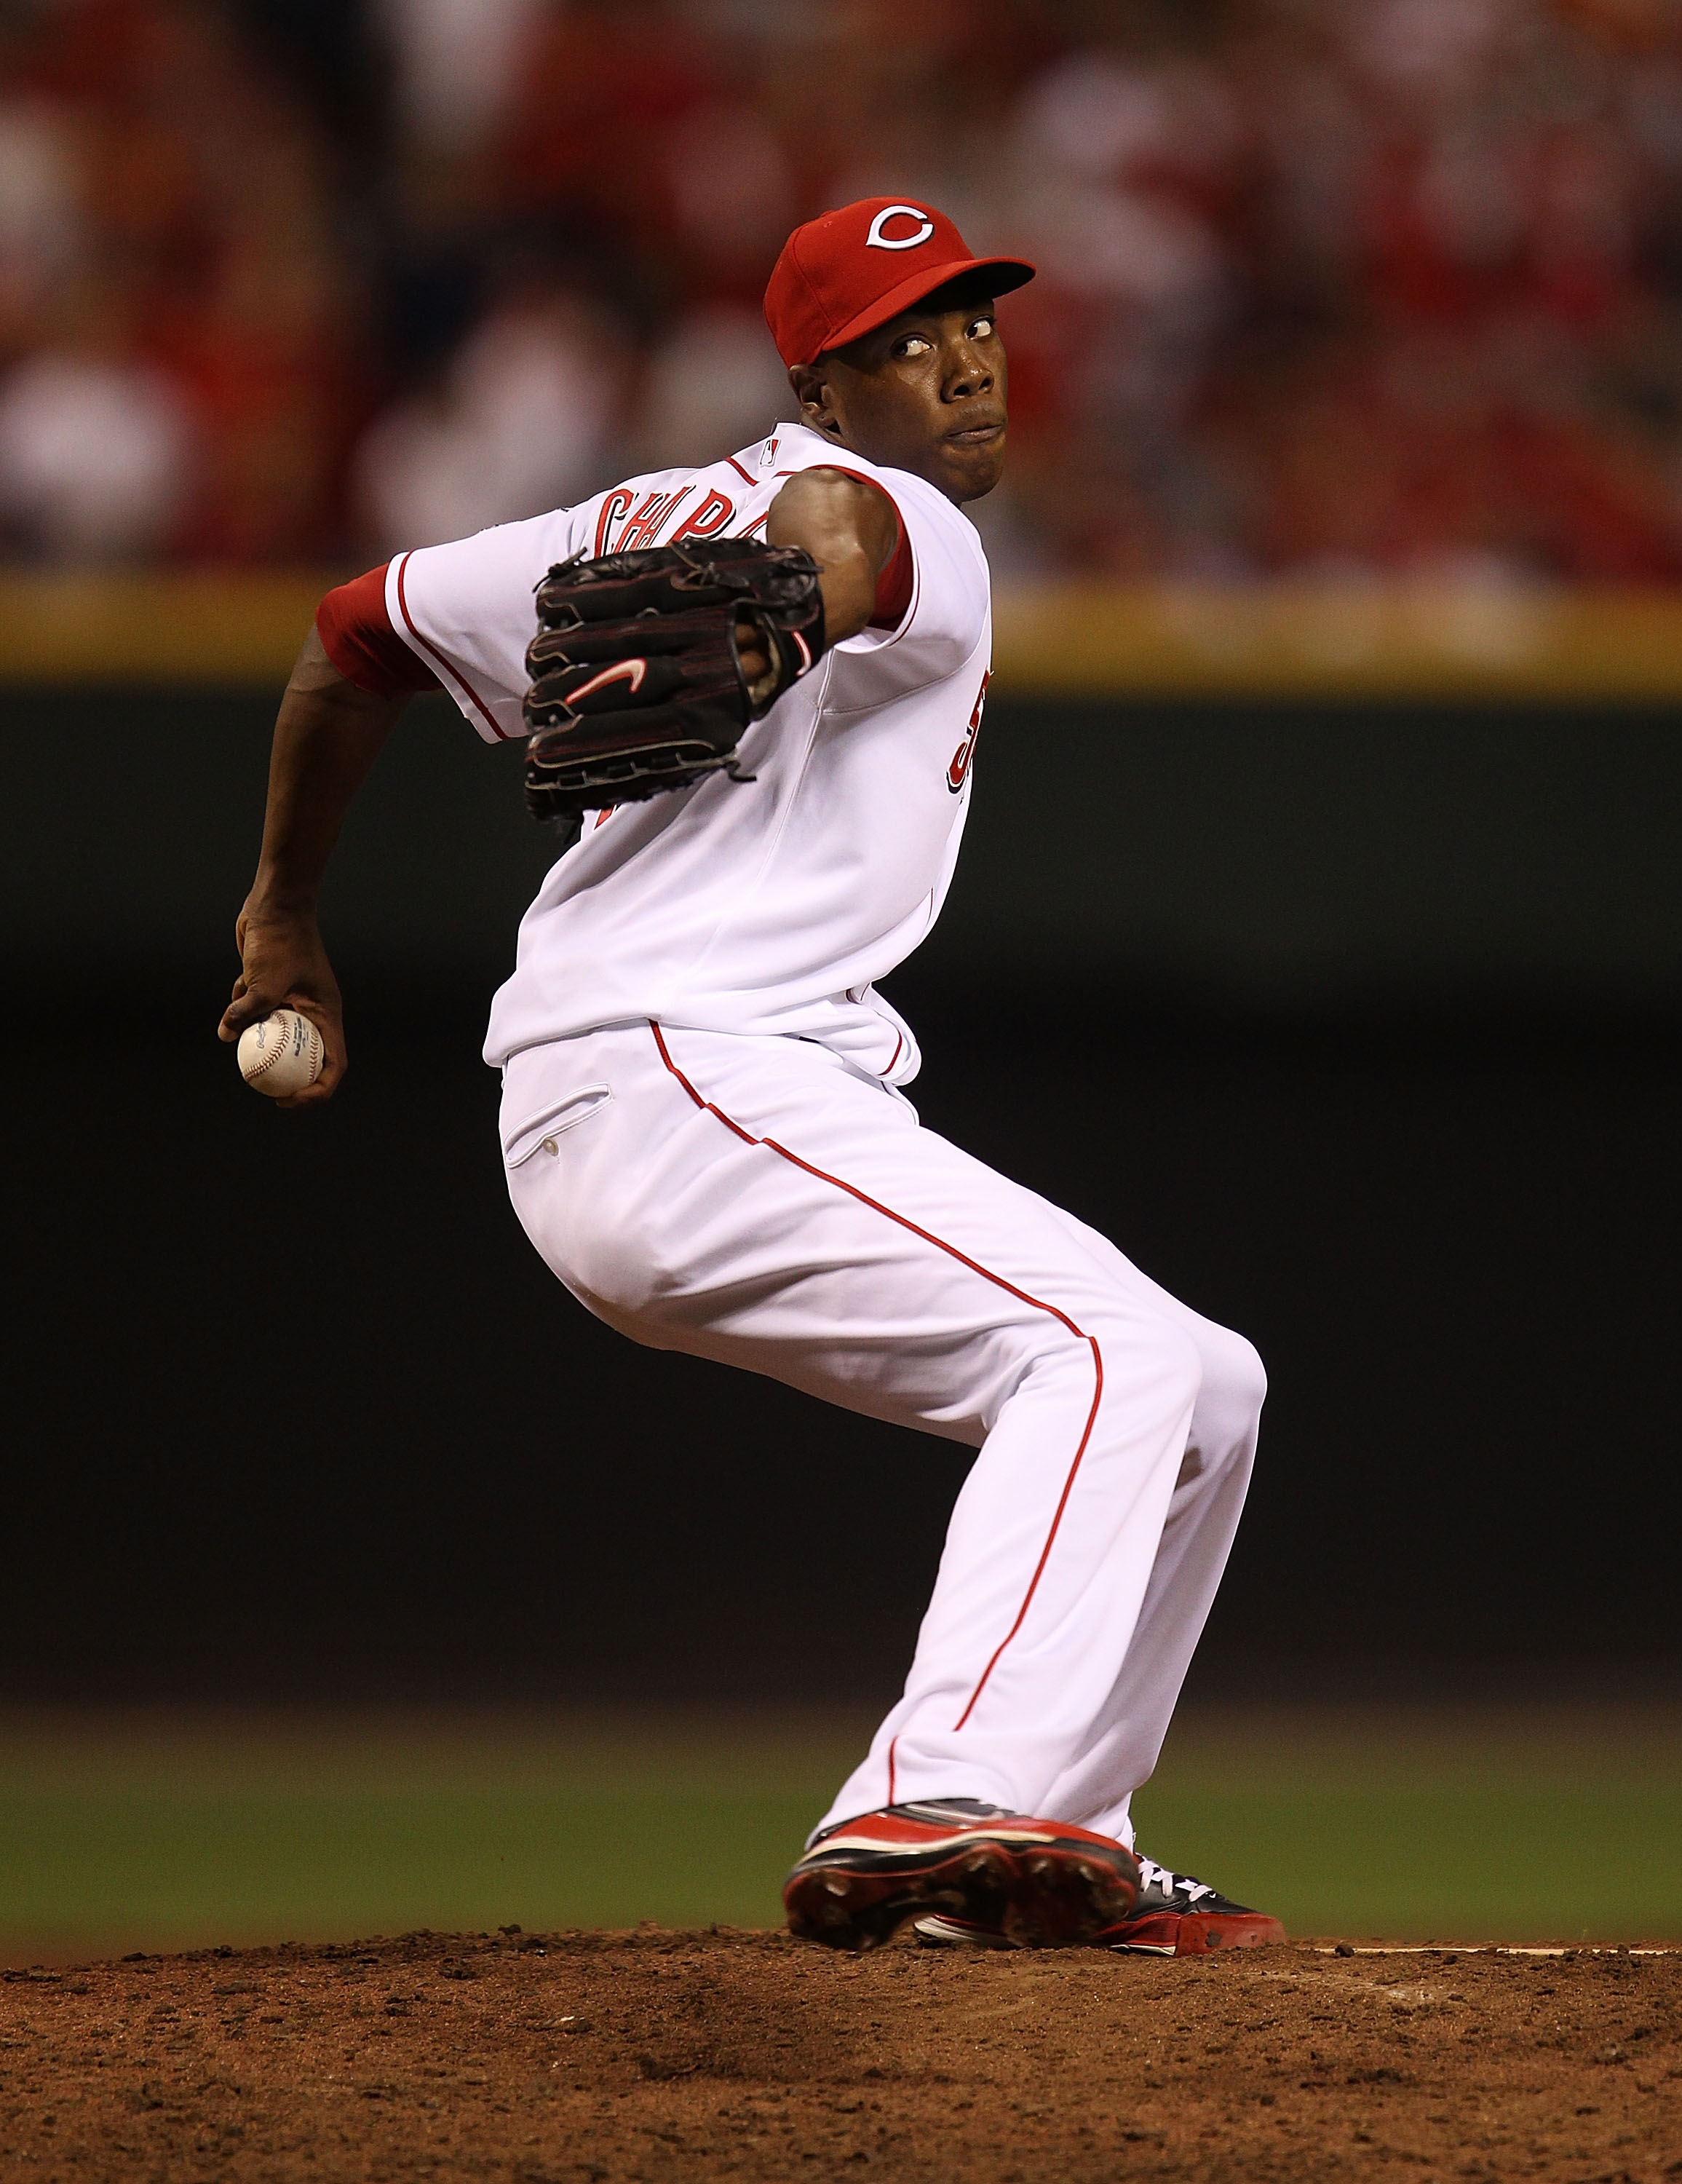 CINCINNATI - OCTOBER 10: Aroldis Chapman #54 of the Cincinnati Reds pitches in the 9th inning against the Philadelphia Phillies during game 3 of the NLDS at Great American Ball Park on October 10, 2010 in Cincinnati, Ohio. The Phillies defeated the Reds 2